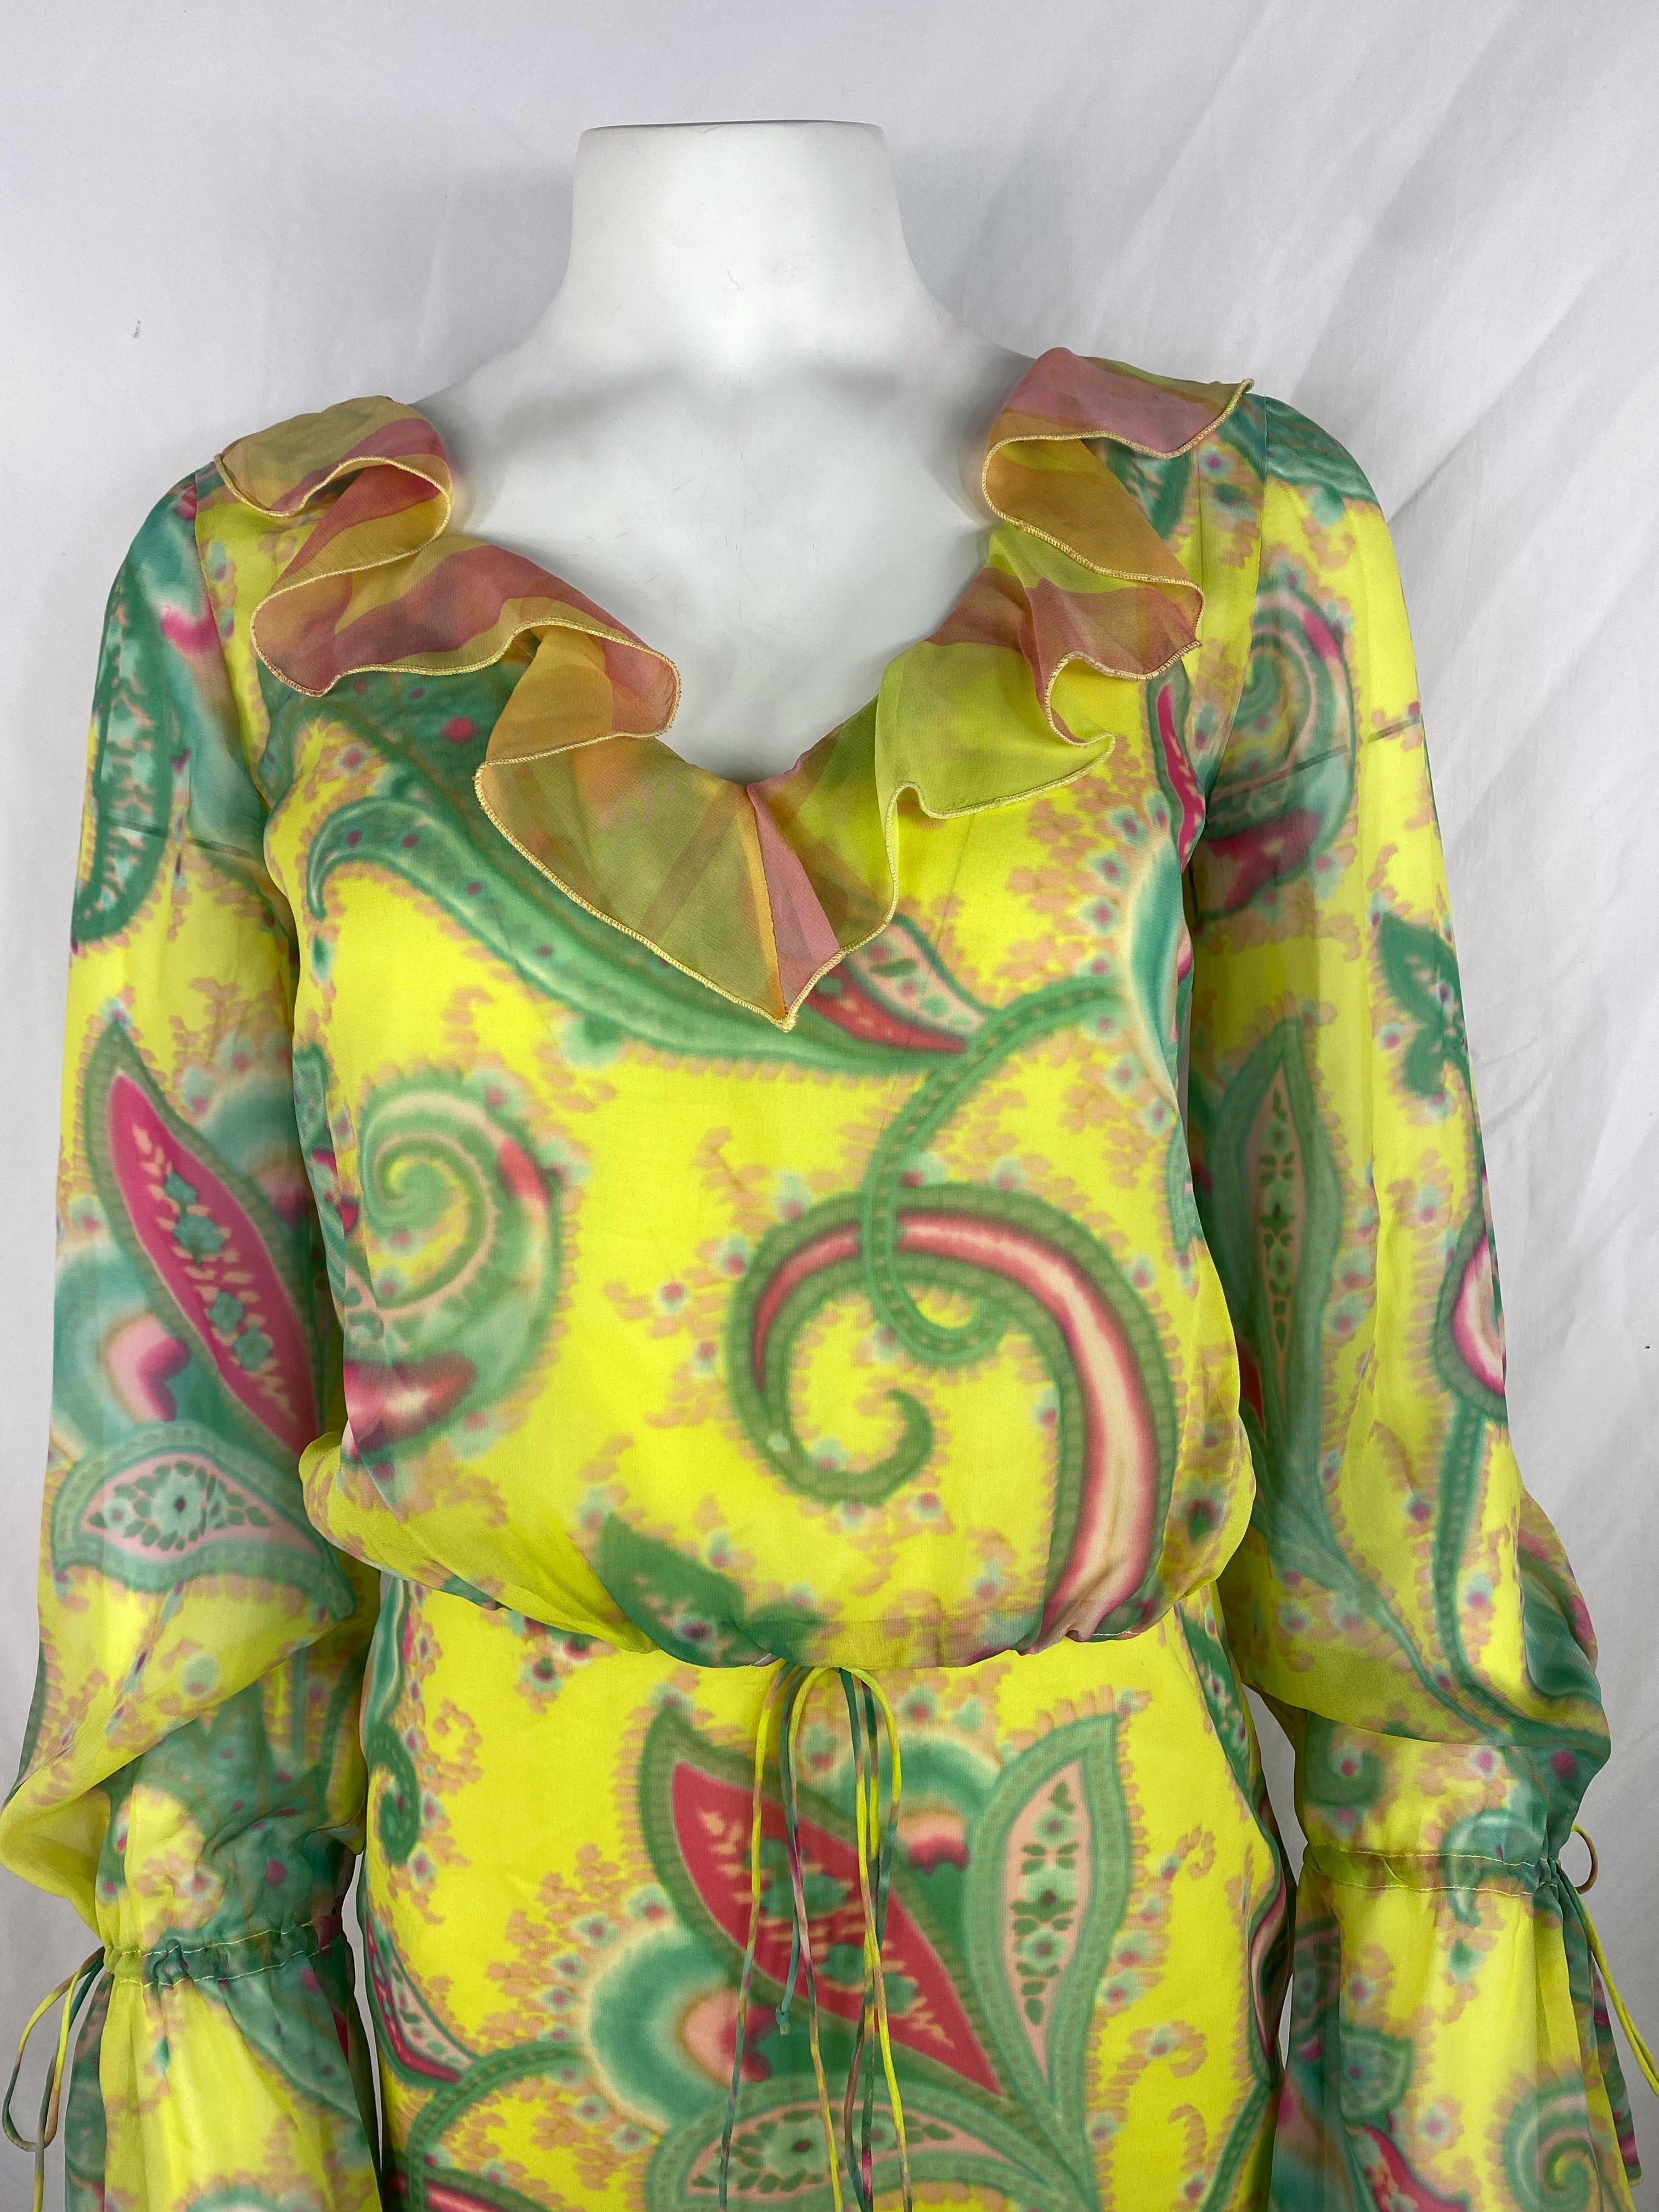 Product details:

The dress is made out of 100% silk, it features pink, green, yellow and orange colors with floral pattern, ruffle design and tie detail at the waist and the sleeves, mid length.